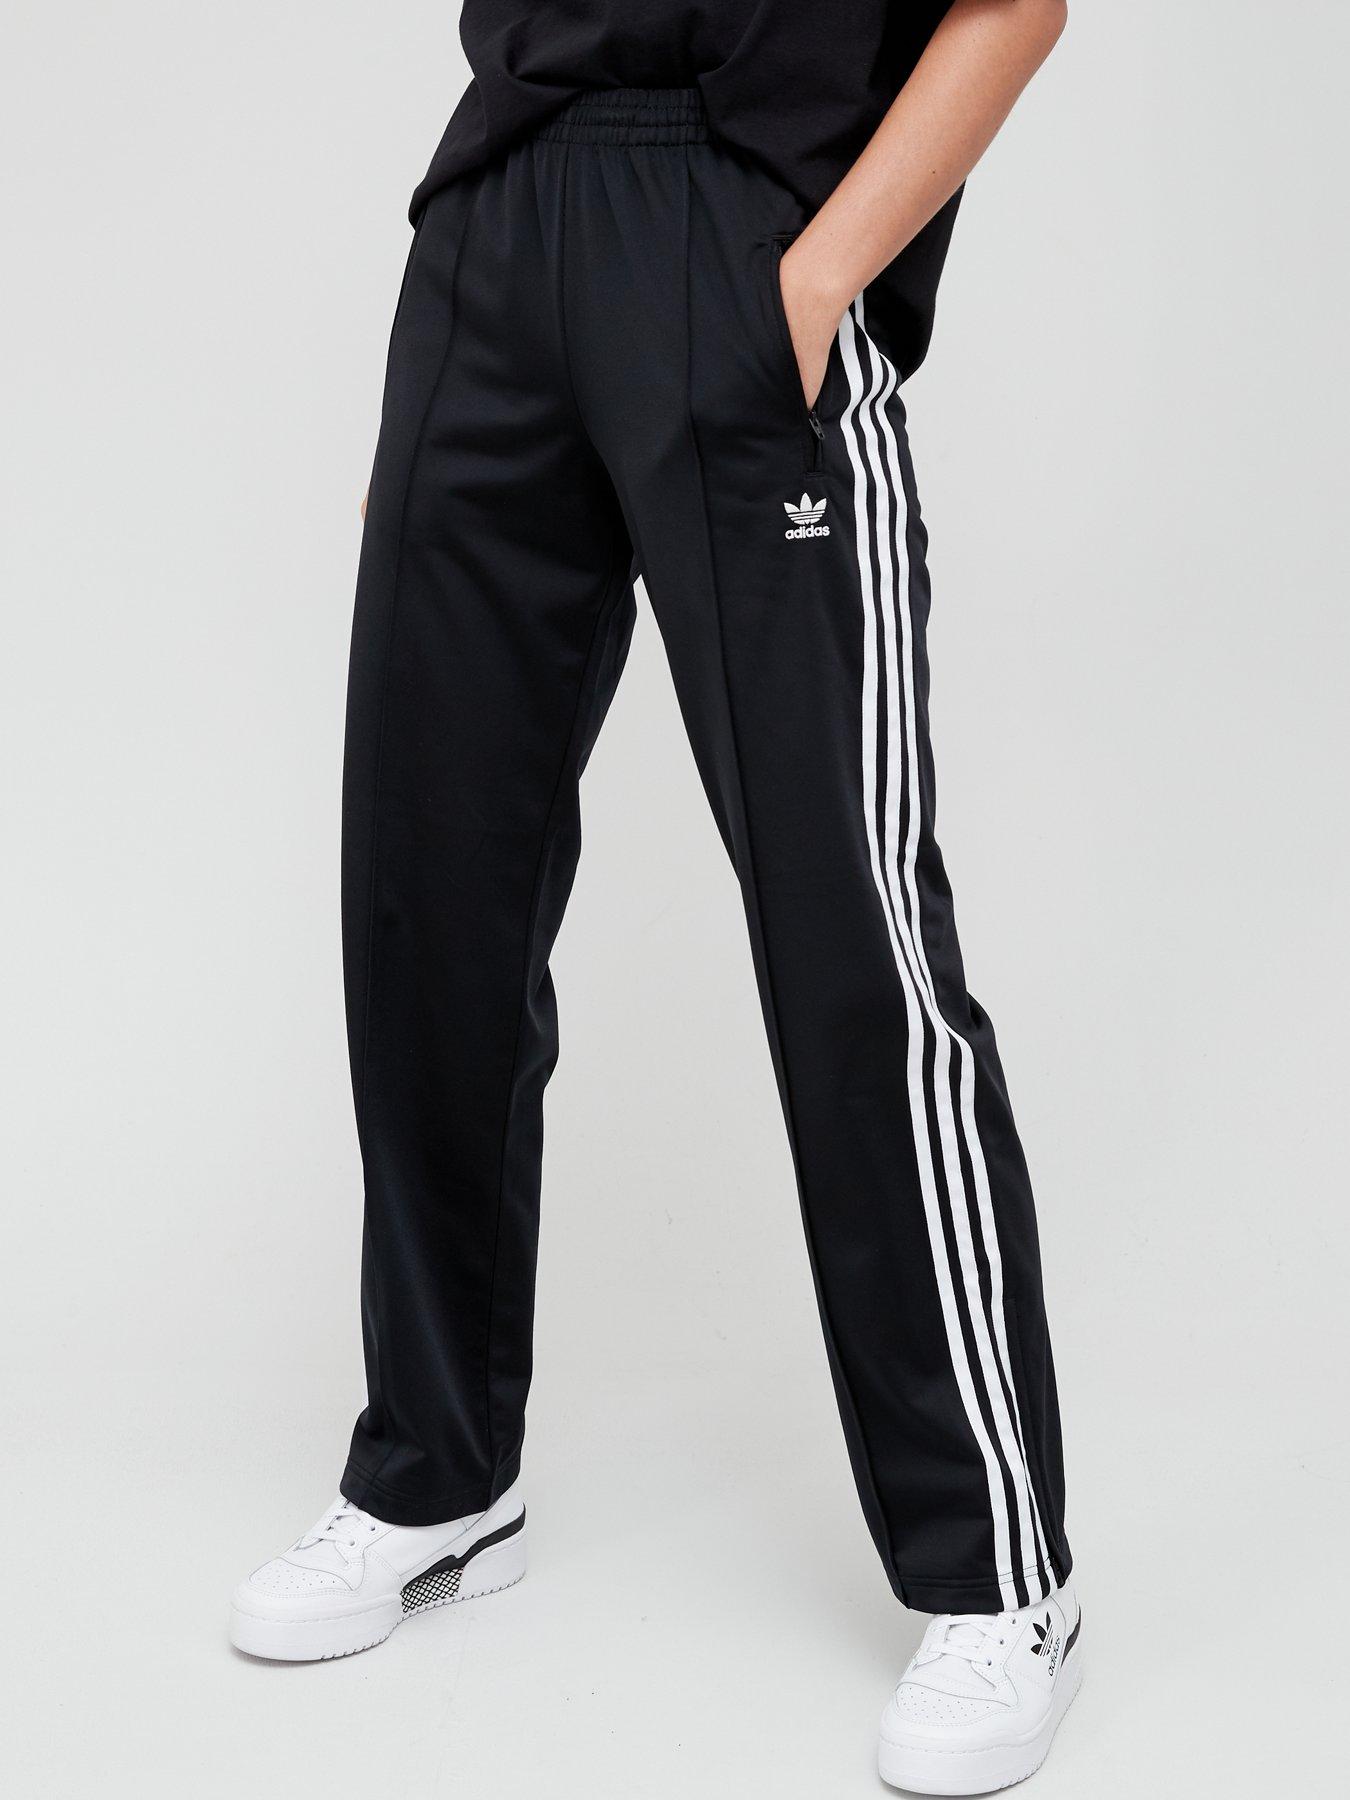 discount 64% NoName tracksuit and joggers Black XL WOMEN FASHION Trousers Tracksuit and joggers Straight 